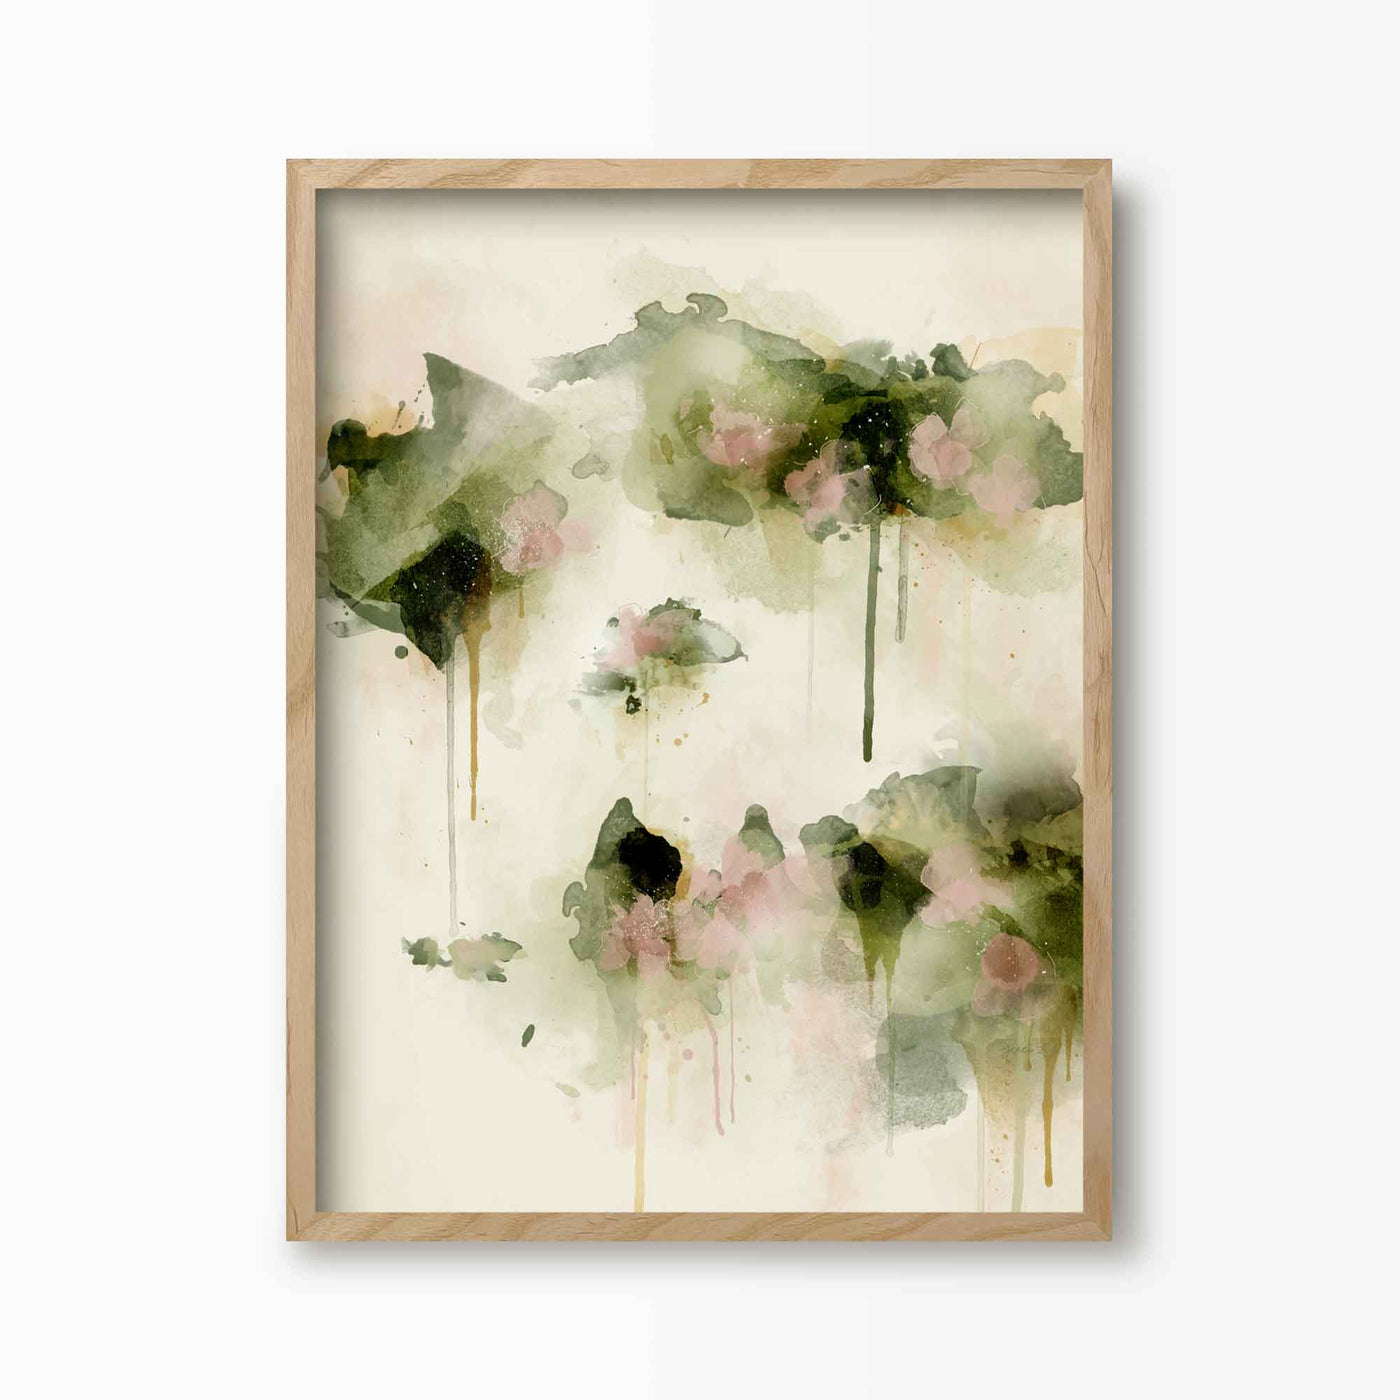 Green Lili 30x40cm (12x16") / Natural Frame Summer Days Abstract Floral Print